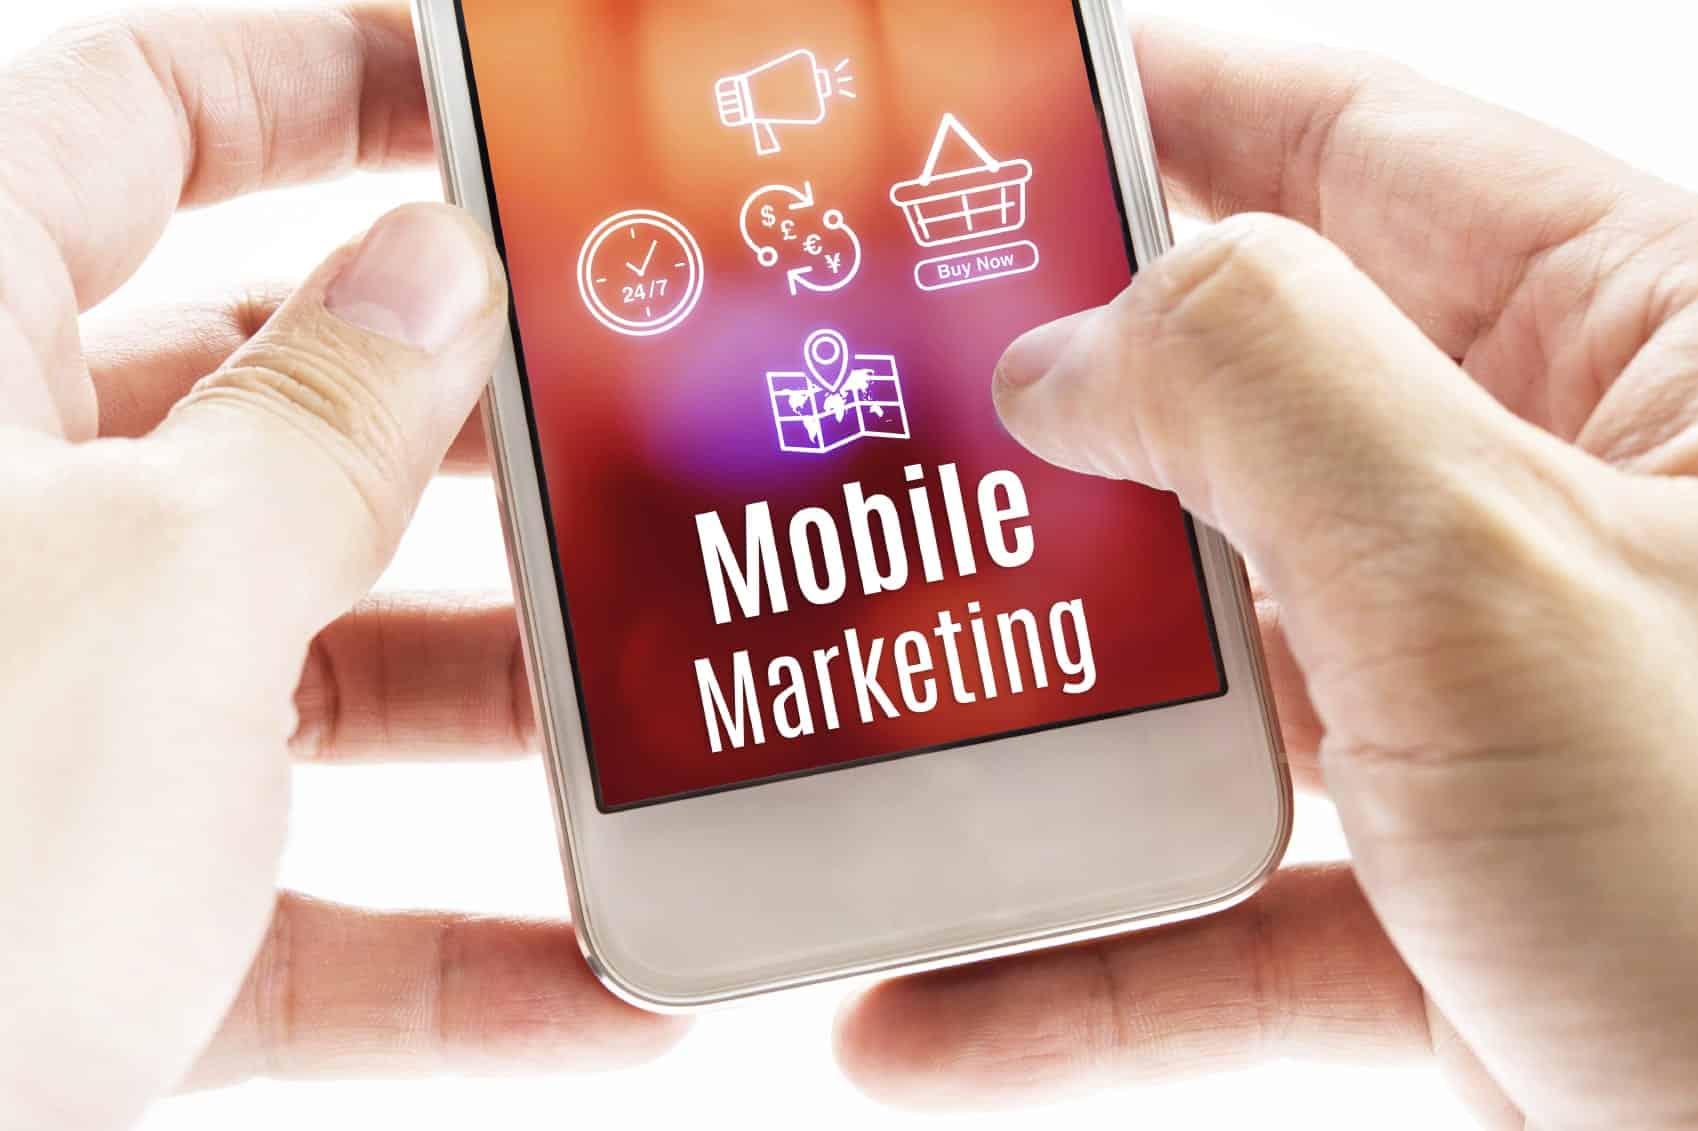 How to Use Mobile Marketing In Your Small Business